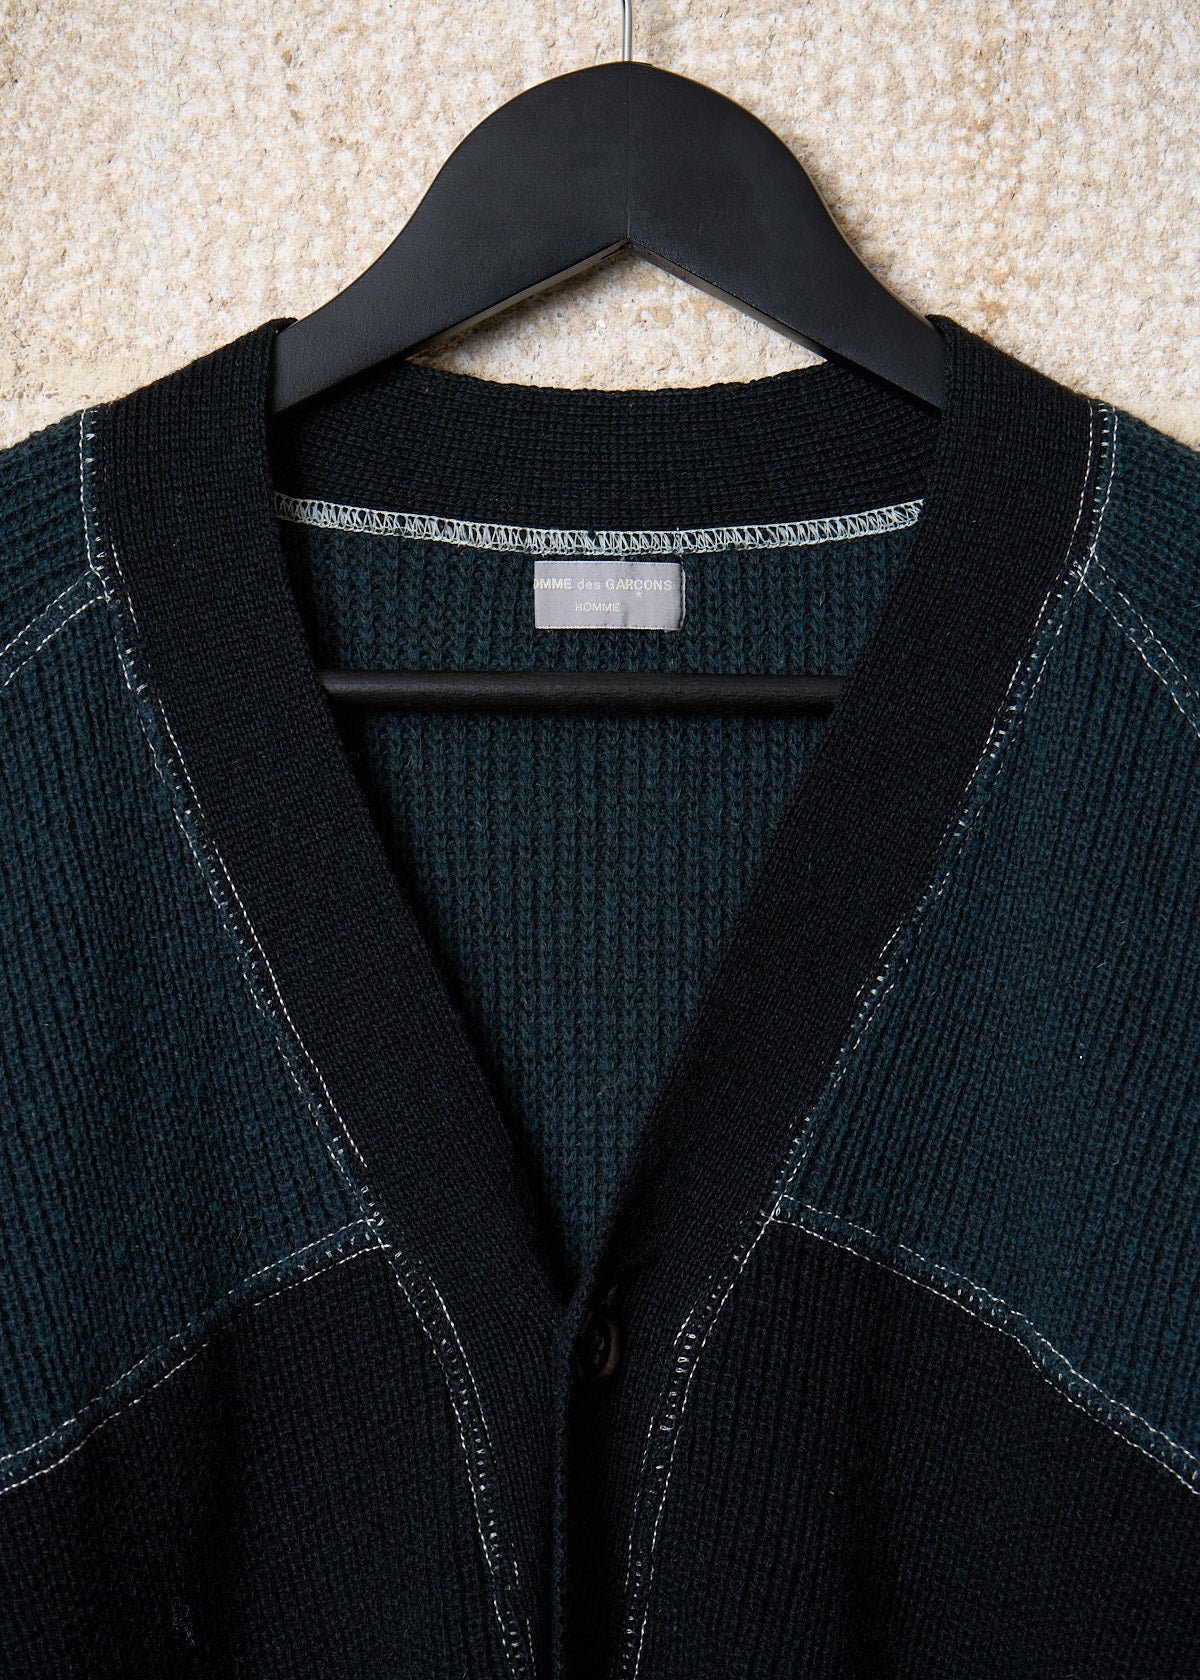 CDG HOMME BLUE WOOL PATCHWORK CARDIGAN 1980's - LARGE